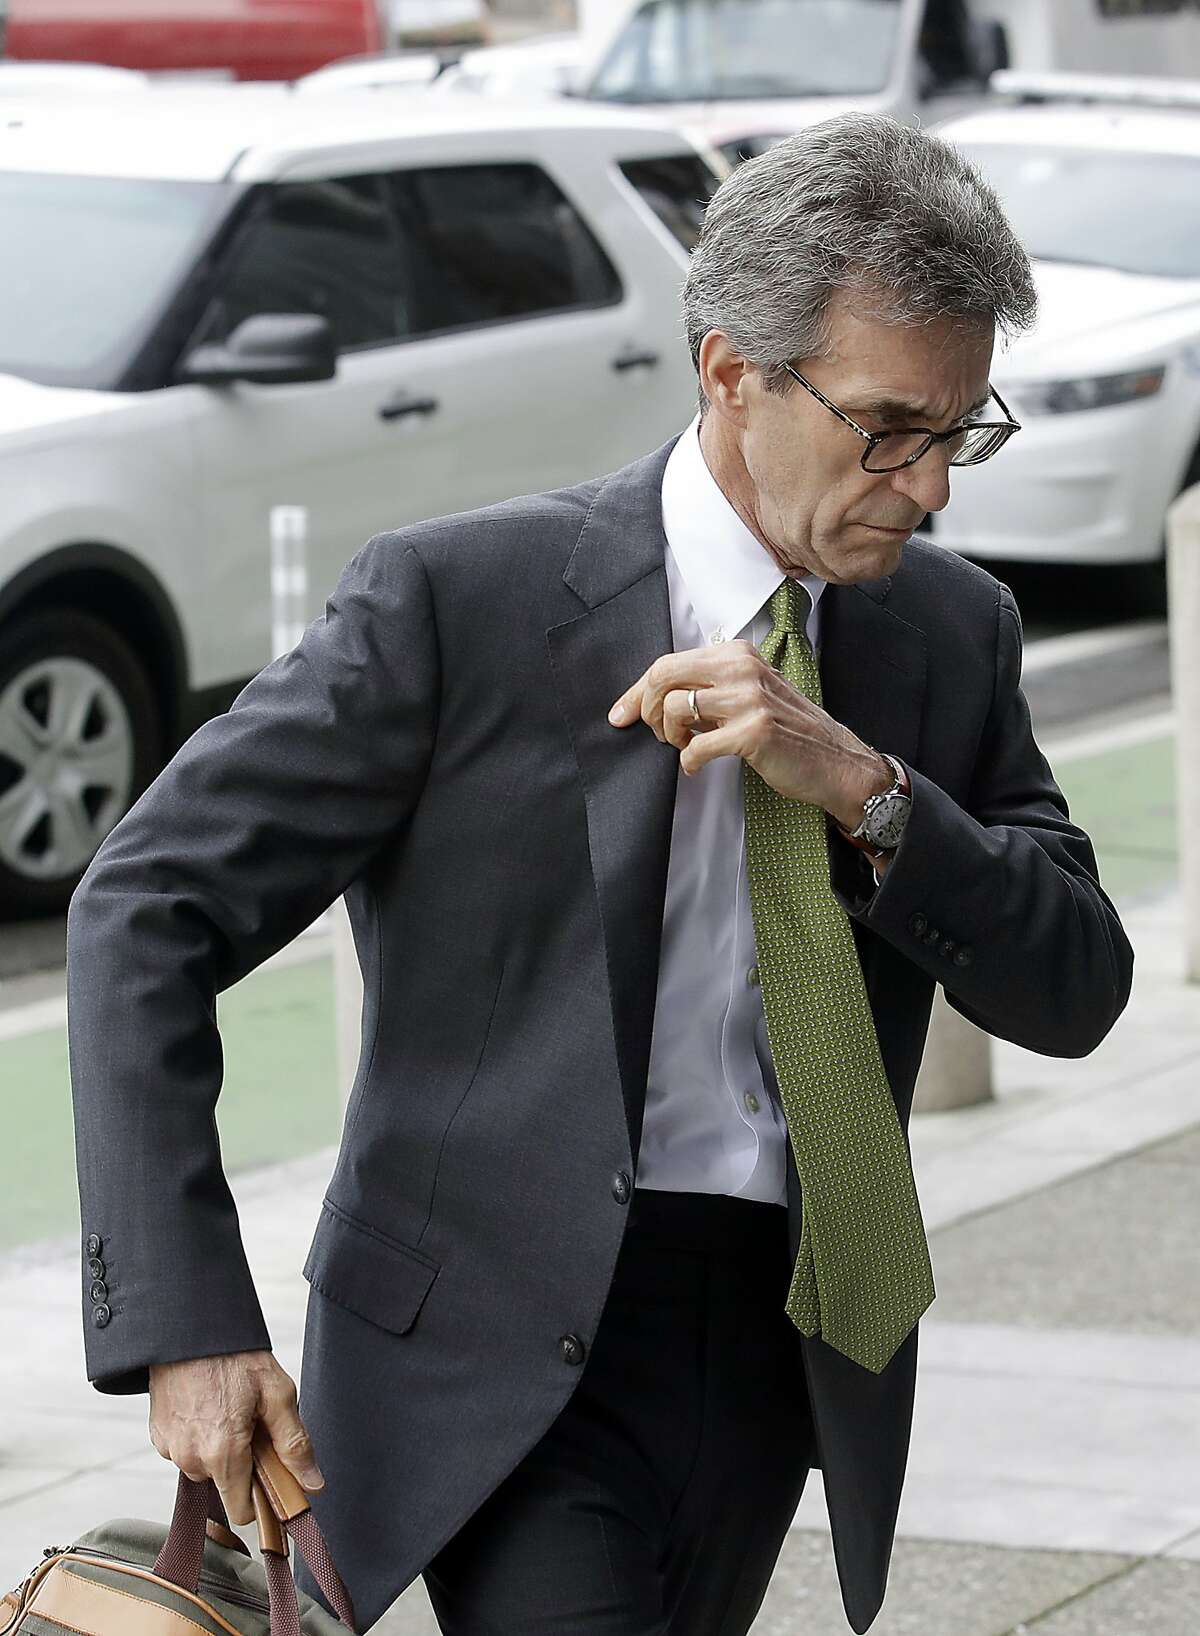 Attorney Stephen Karotkin, representing Pacific Gas & Electric Corp., arrives at a Federal Courthouse in San Francisco, Tuesday, Jan. 29, 2019. Faced with potentially ruinous lawsuits over California's recent wildfires, Pacific Gas & Electric Corp. filed for bankruptcy protection Tuesday in a move that could lead to higher bills for customers of the nation's biggest utility and reduce the size of any payouts to fire victims. (AP Photo/Jeff Chiu)